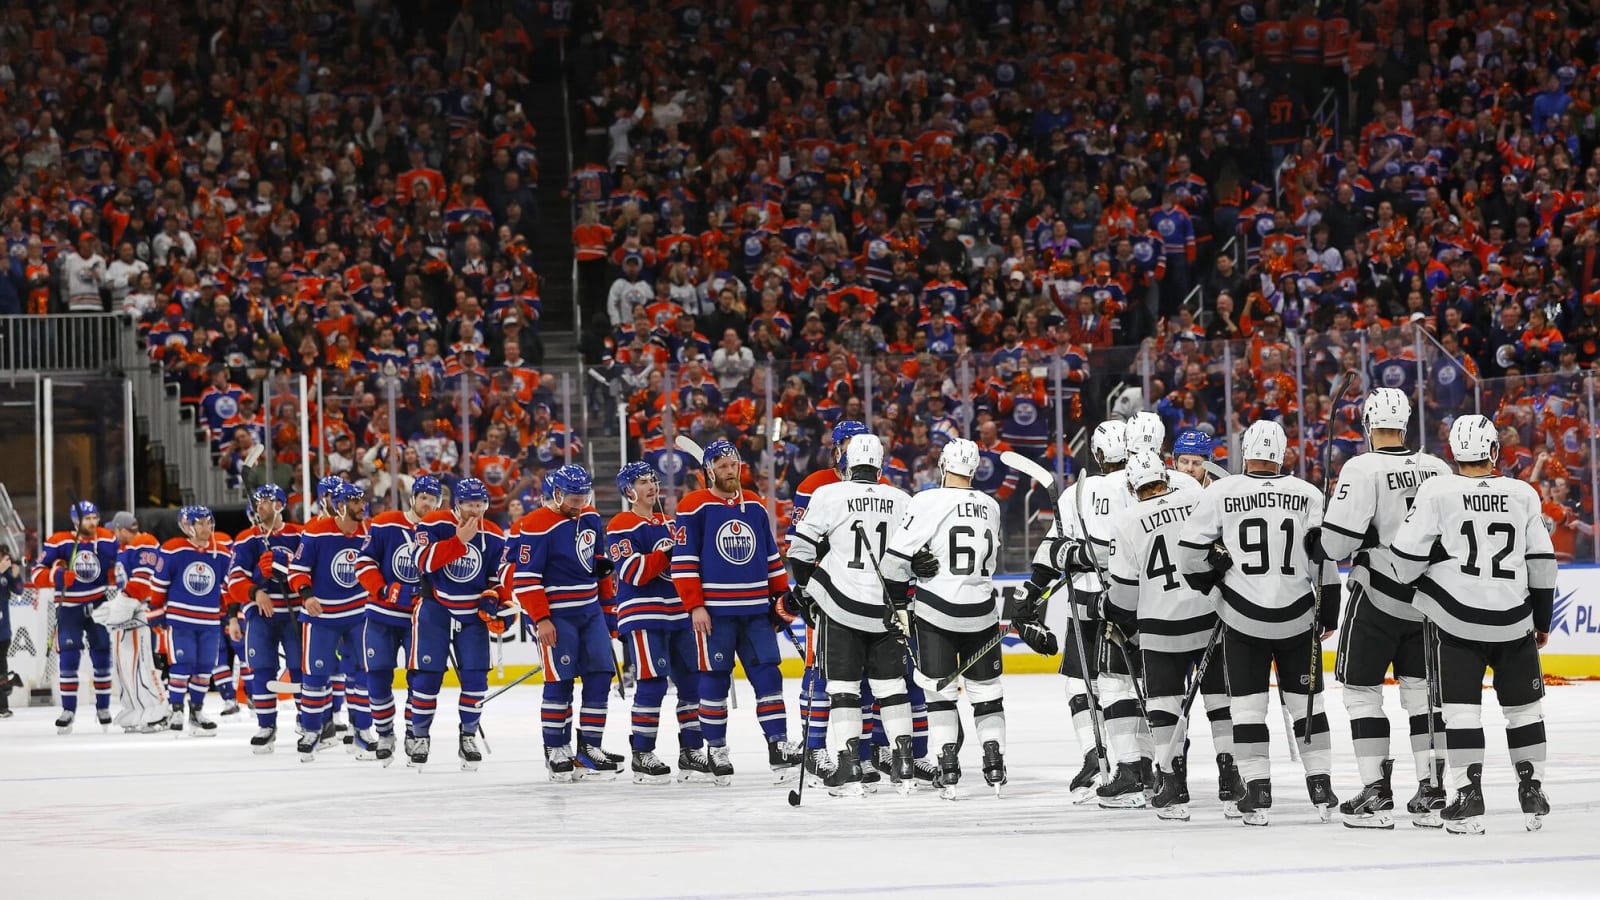 What to expect for the Oilers in Round 2, and could the Kings be in line for a rebuild